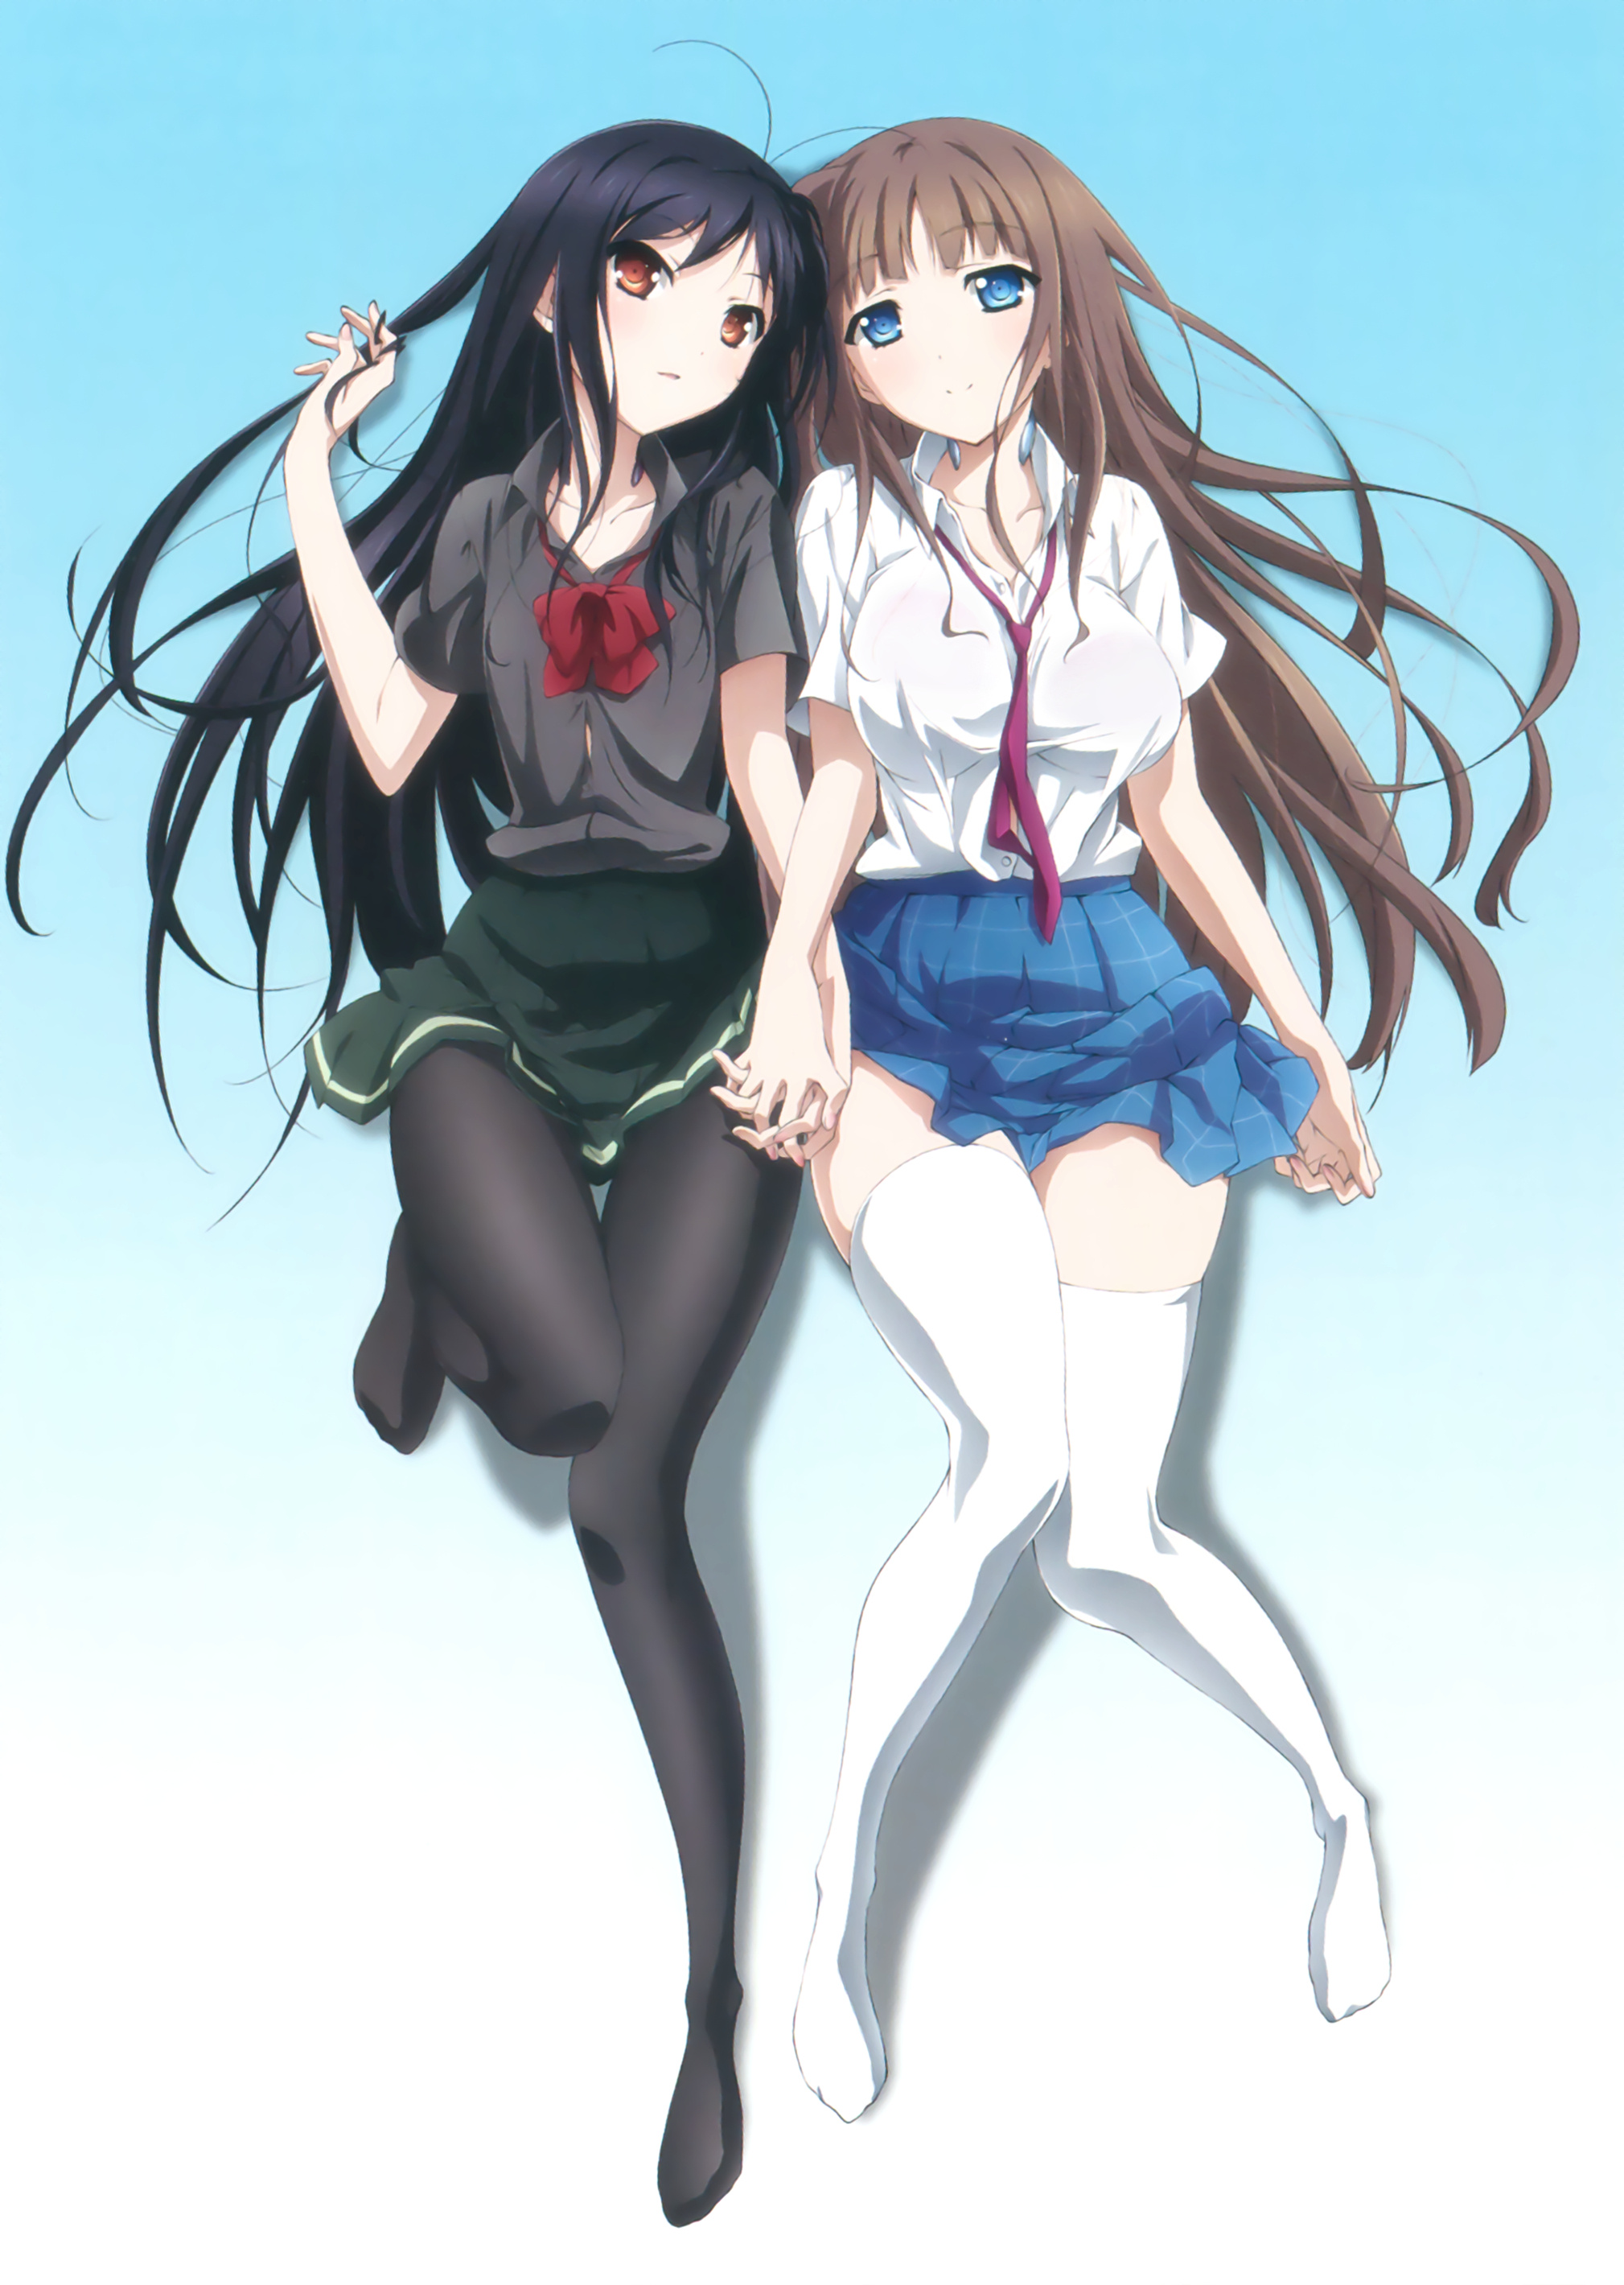 Accel World anime, Zerochan gallery, Artistic wallpapers, Anime enthusiasts, 2020x2840 HD Phone